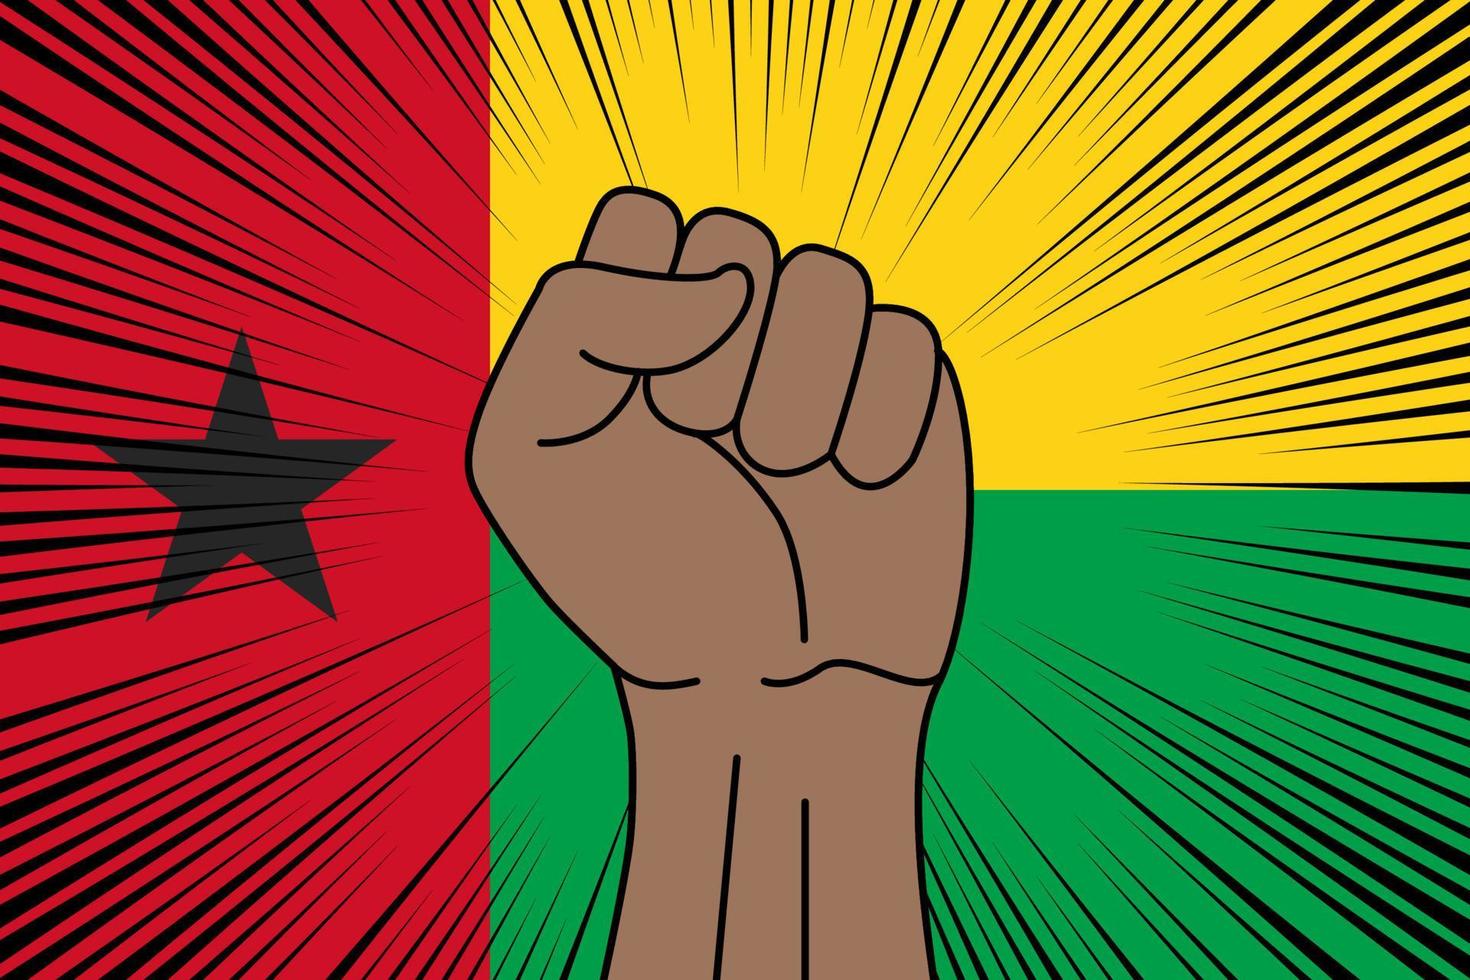 Human fist clenched symbol on flag of Guinea-Bissau vector